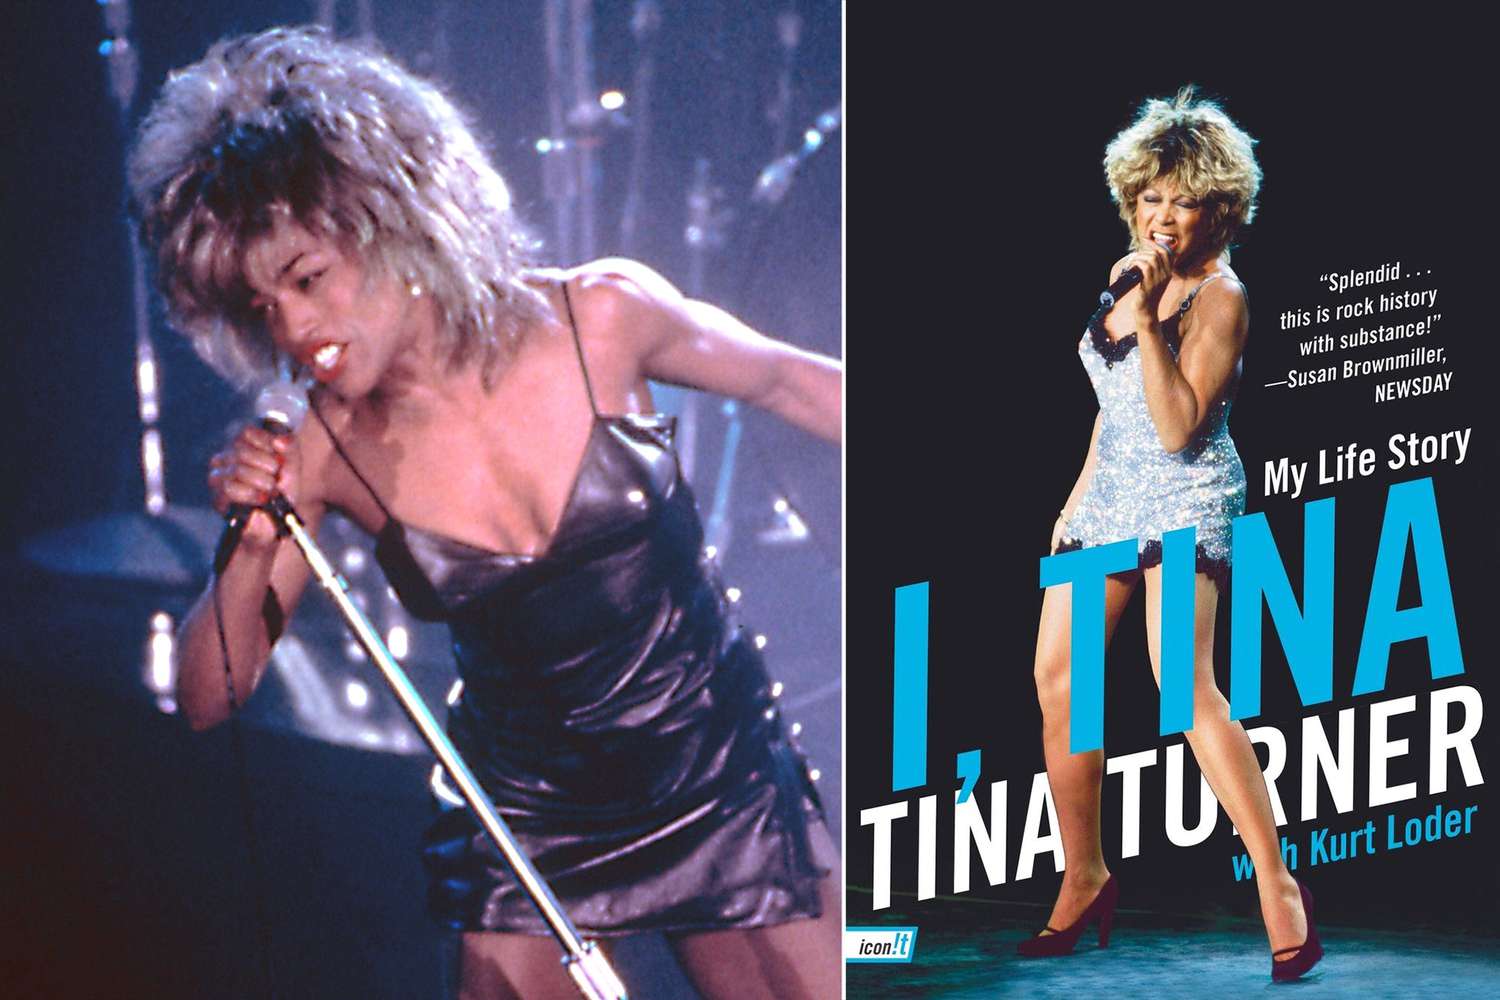 I, Tina and What's Love Got to Do With It (1993)